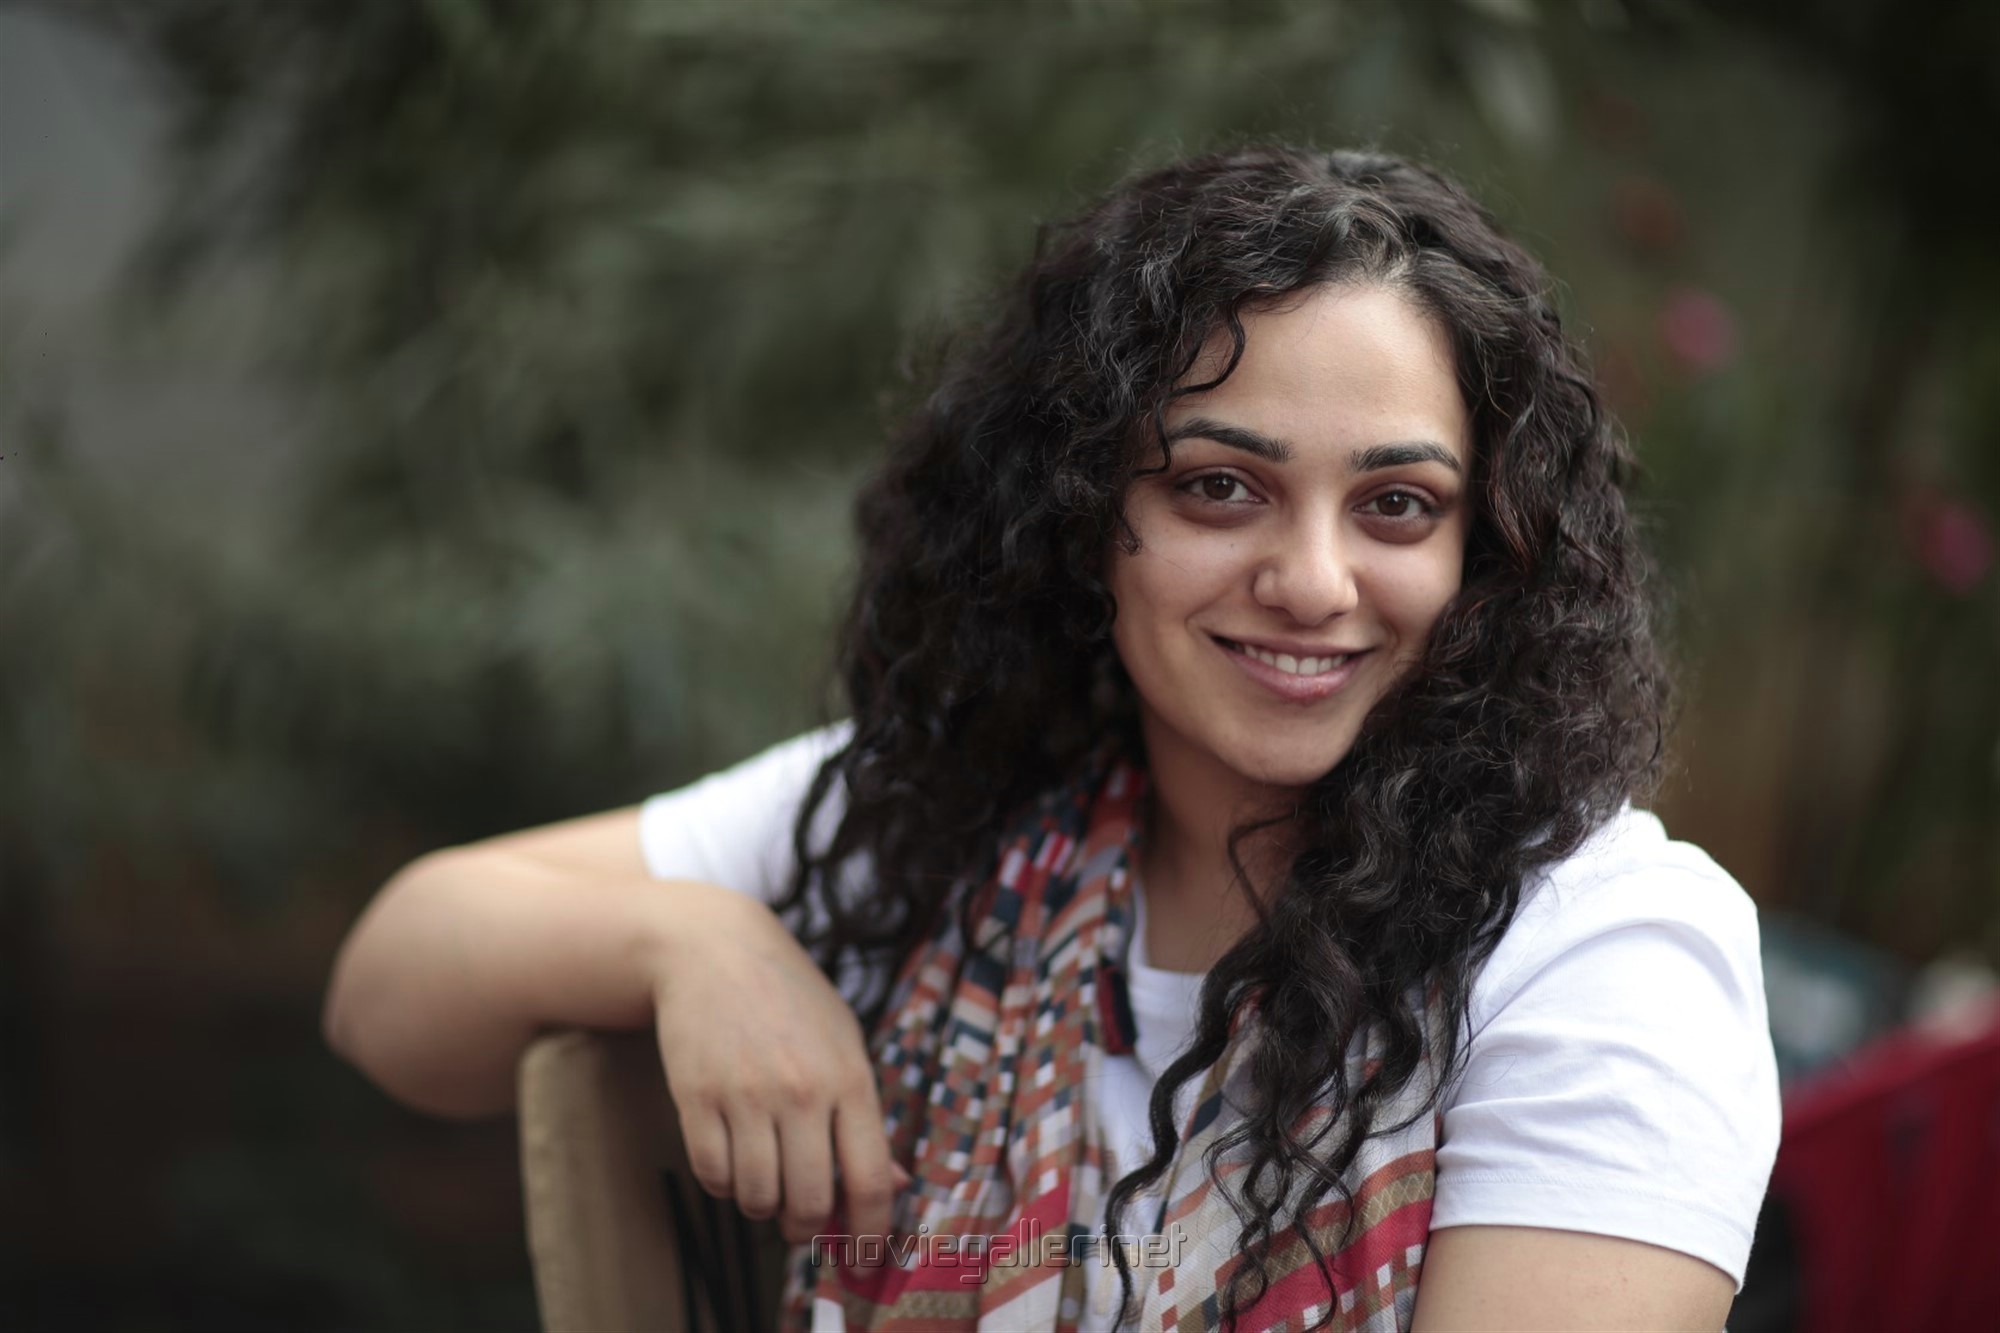 Actress Nithya Menon in Psycho Movie Images HD.